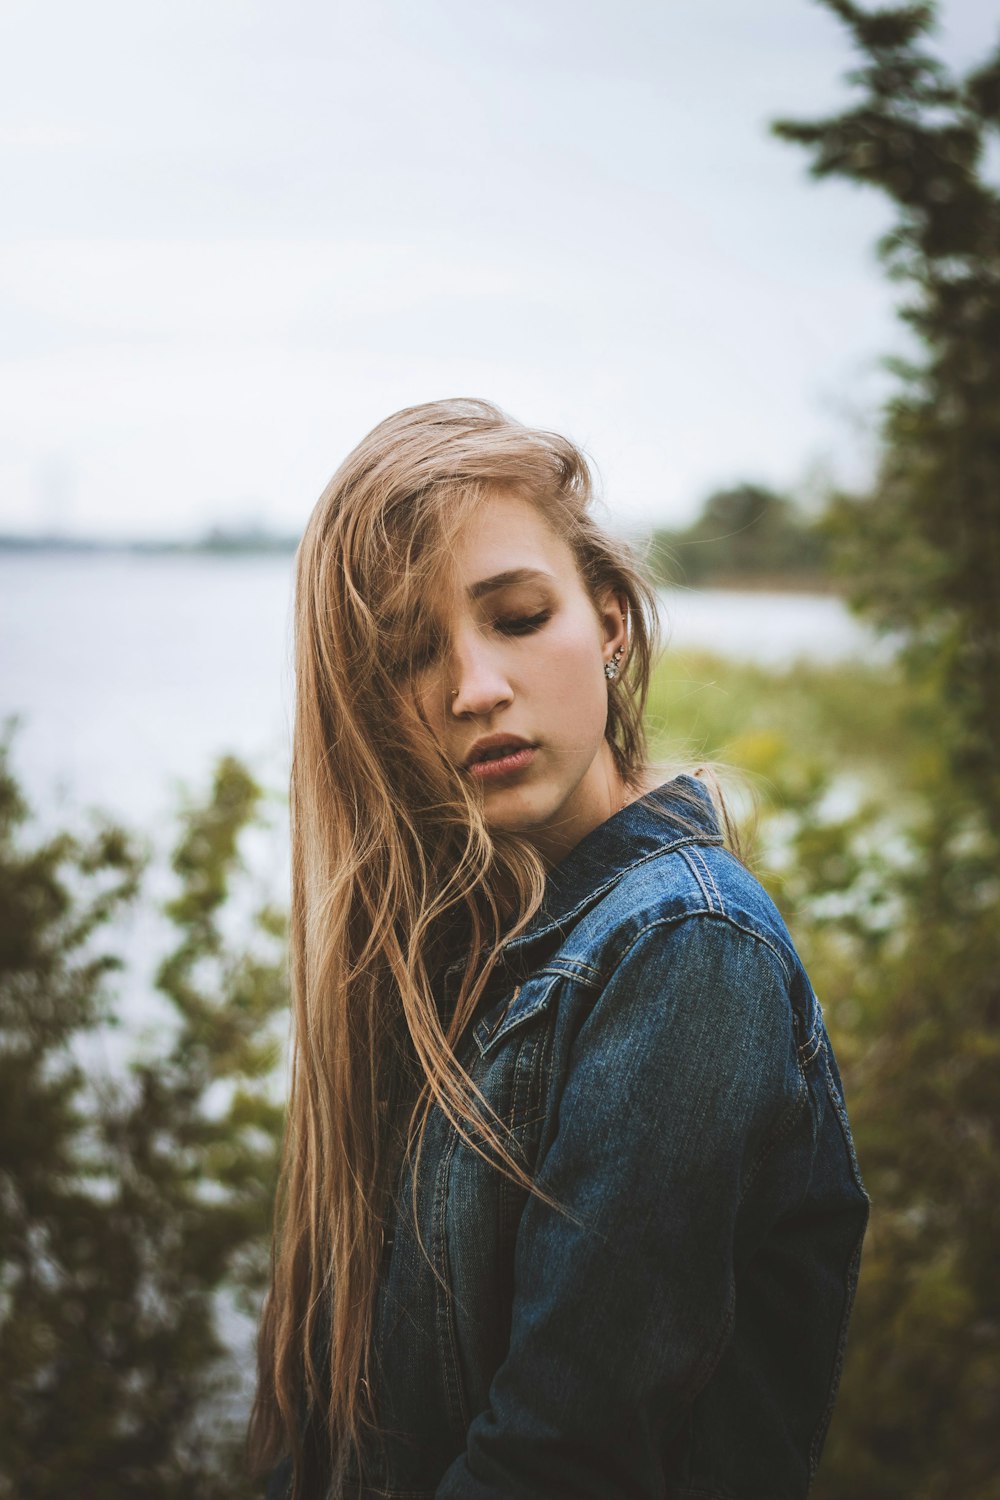 woman in blue denim jacket standing near body of water during daytime